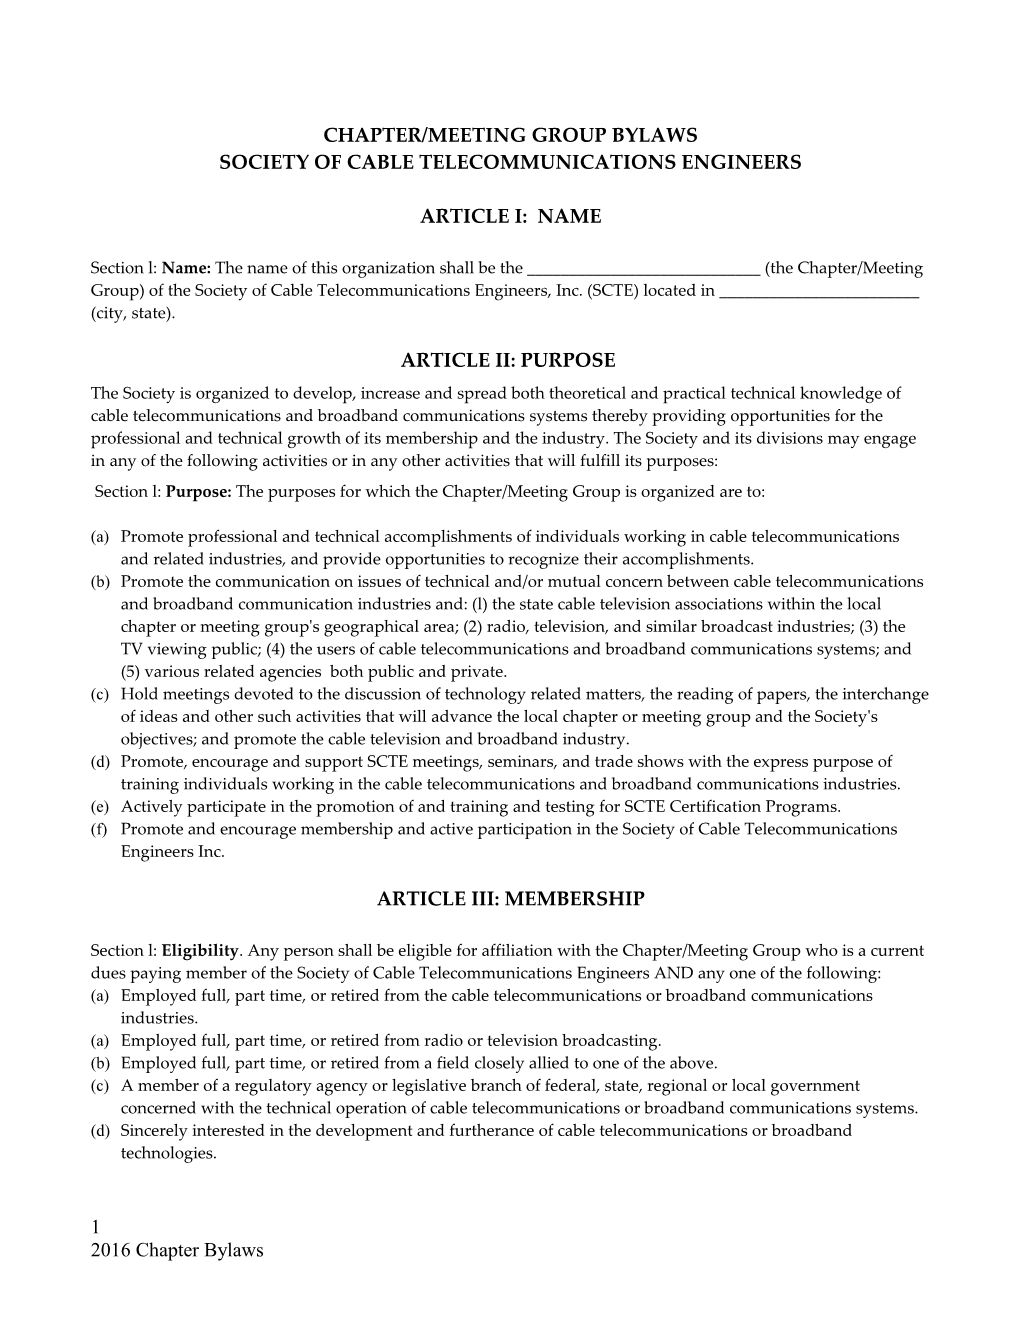 National Bylaws of the Society of Cable Telecommunications Engineers Inc